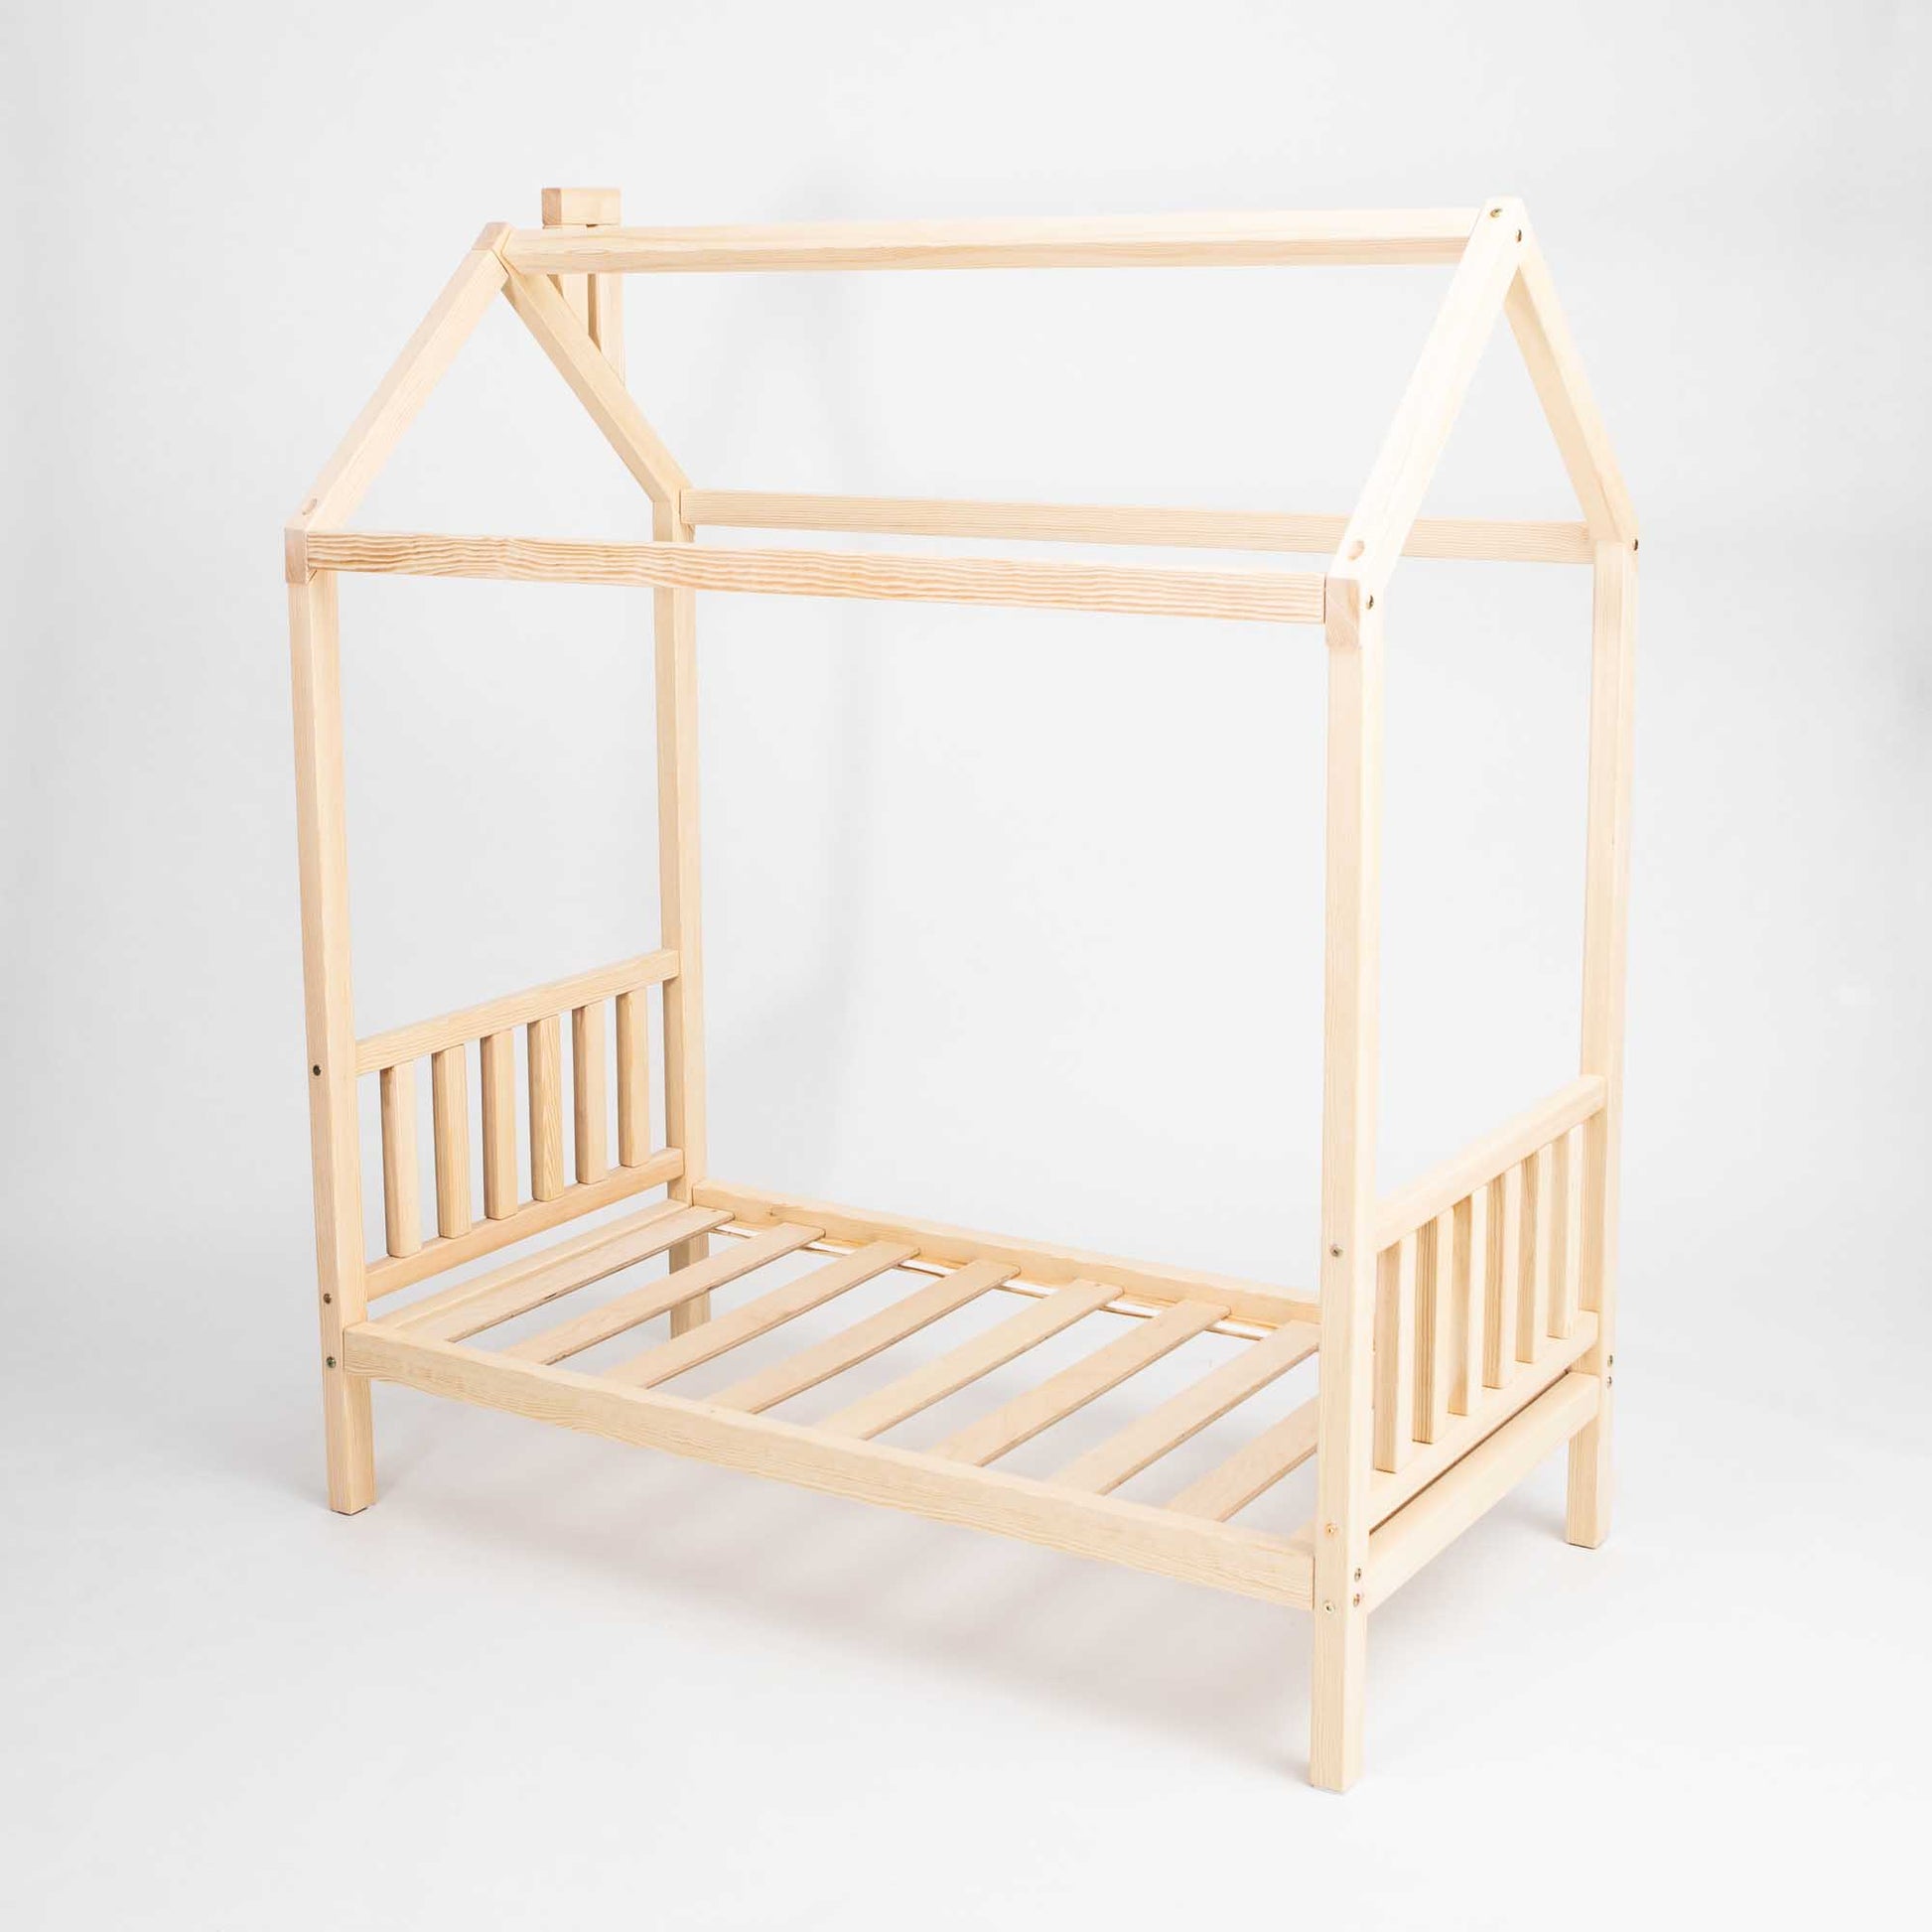 A toddler house bed on legs with a headboard and footboard with a wooden frame and slats.